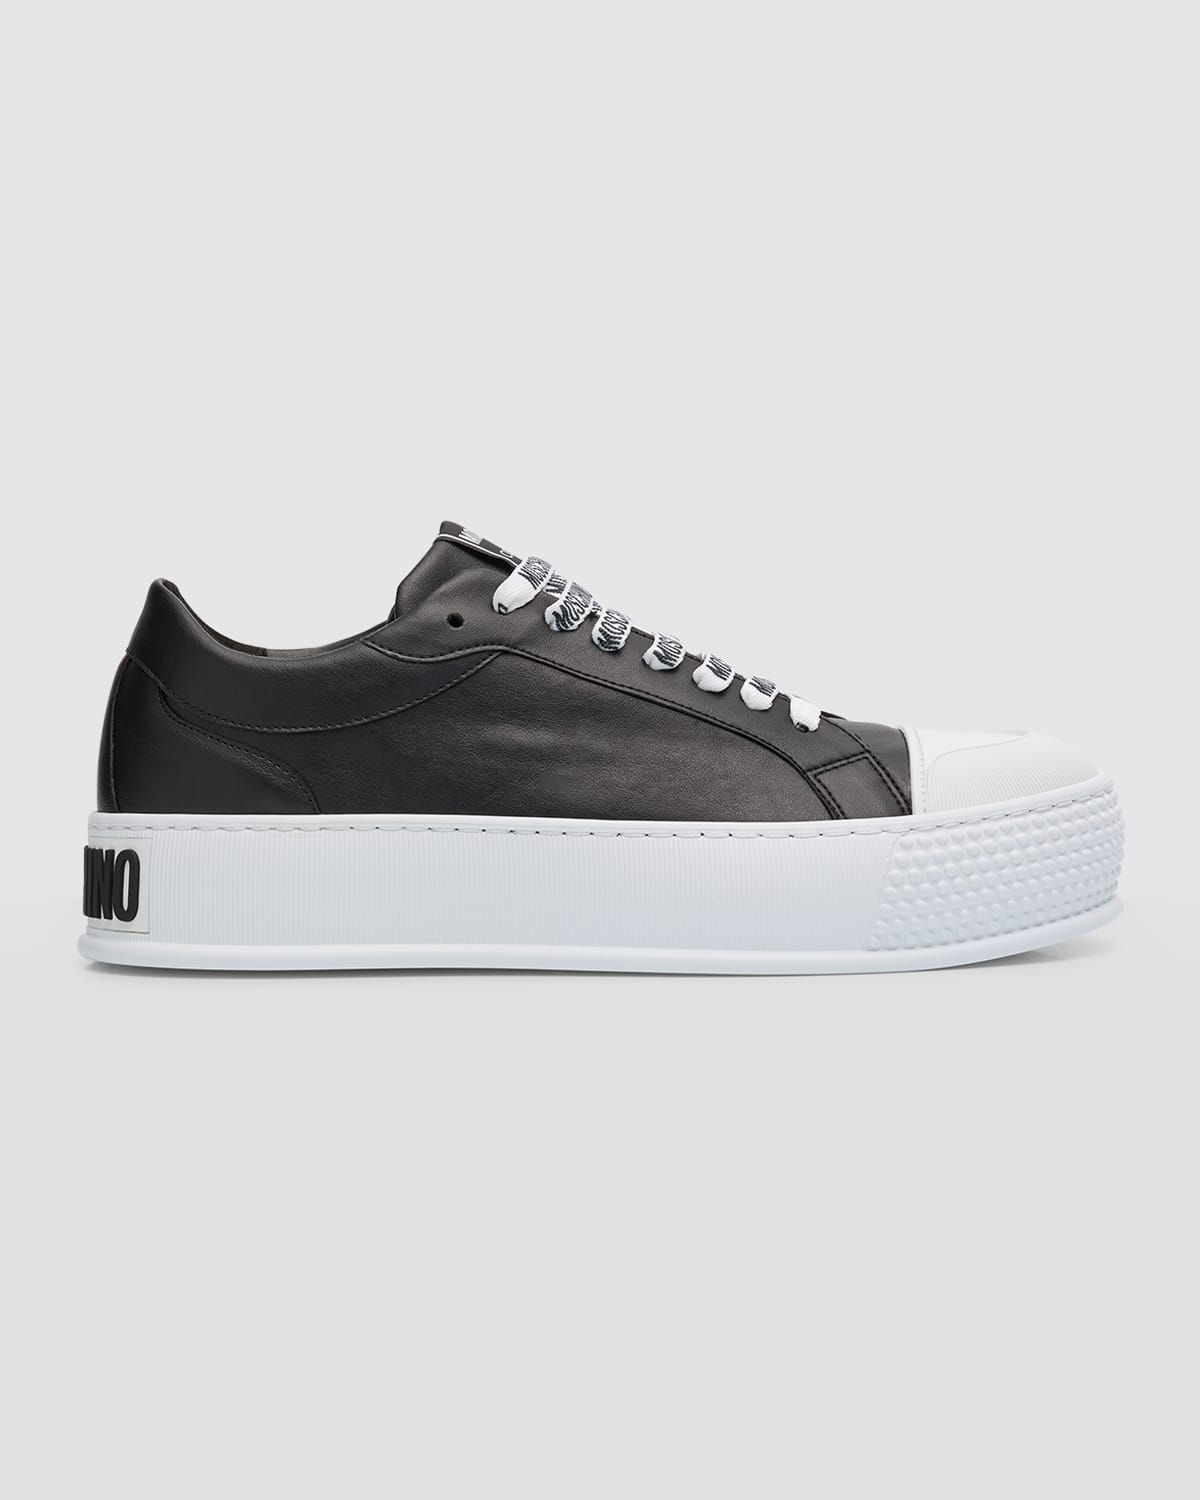 Men's Bumps and Stripes Low-Top Sneakers